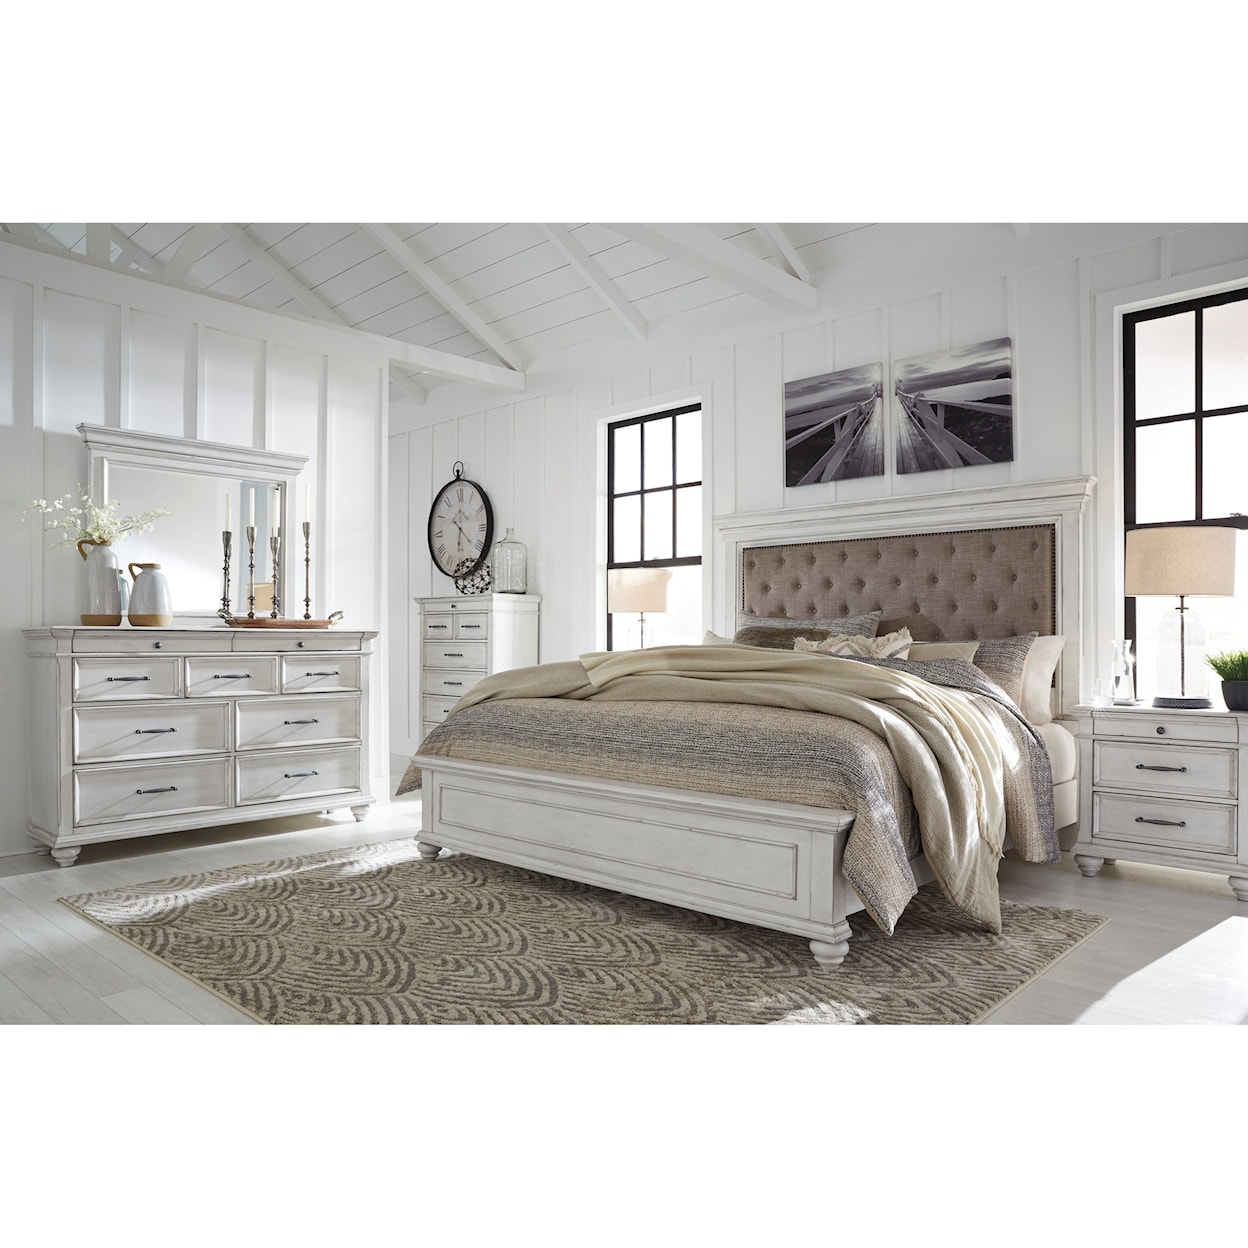 Benchcraft by Ashley Kanwyn King Upholstered Bed